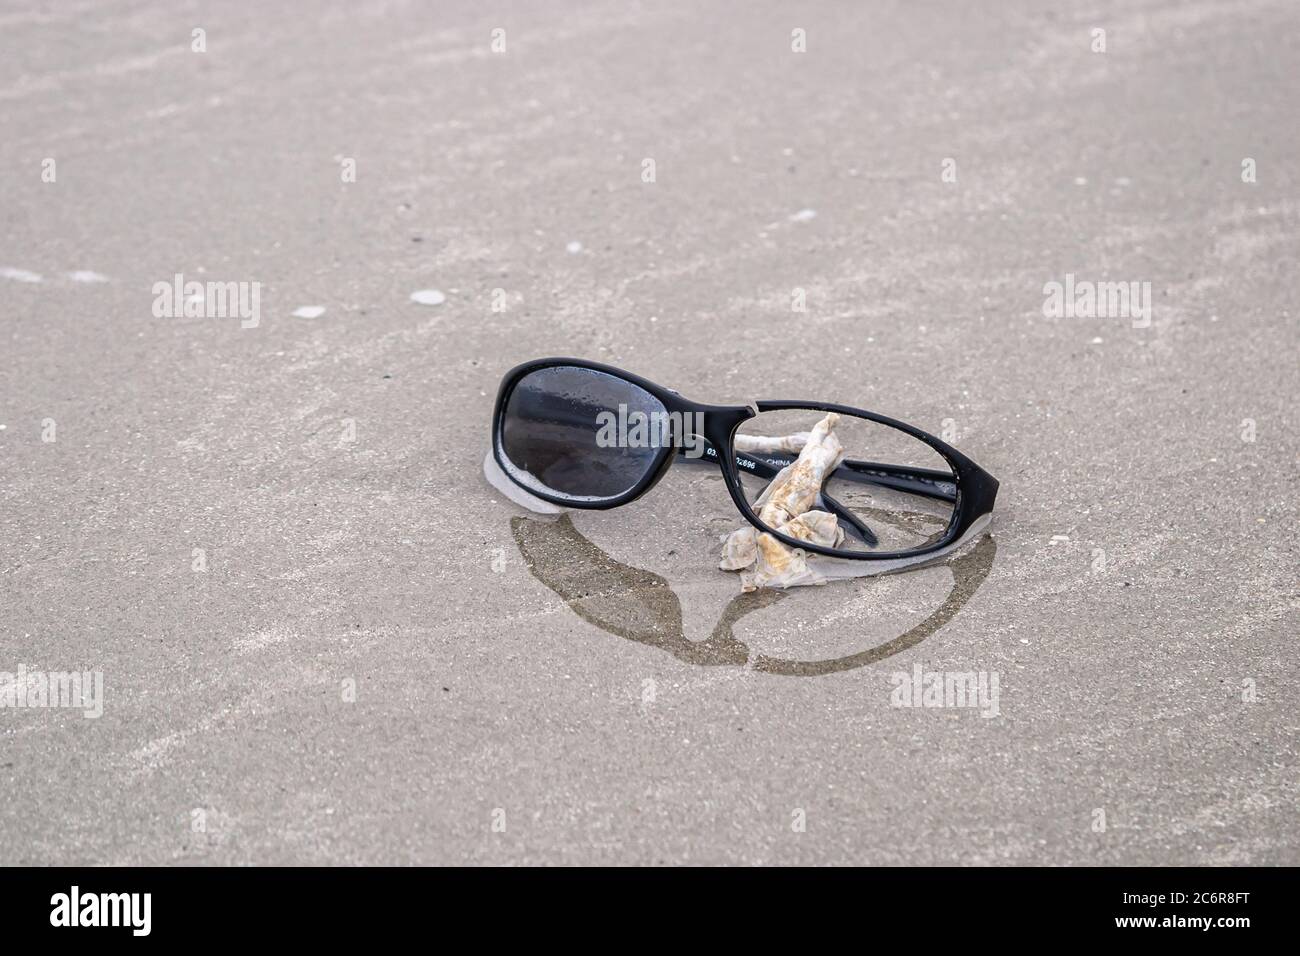 BEACH DEBRIS - CIRCA 2009.  Broken sunglasses,  made of plastic, washed up on a beach Stock Photo